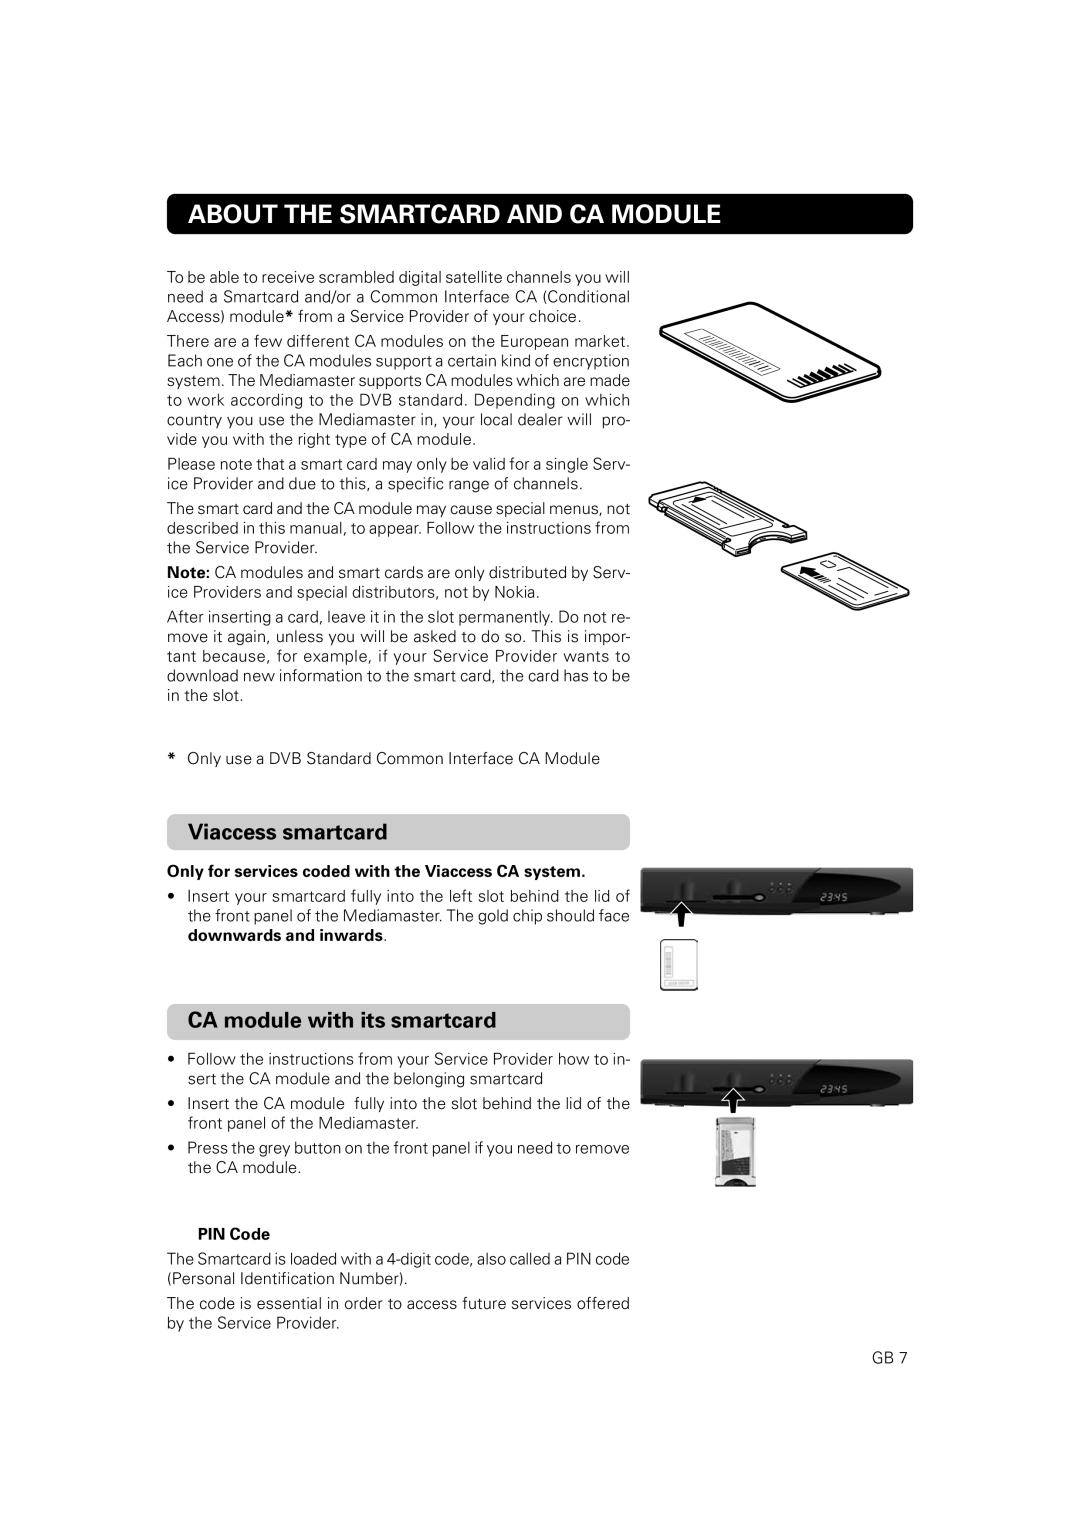 Nokia 9802 S owner manual About The Smartcard And Ca Module, Viaccess smartcard, CA module with its smartcard, PIN Code 